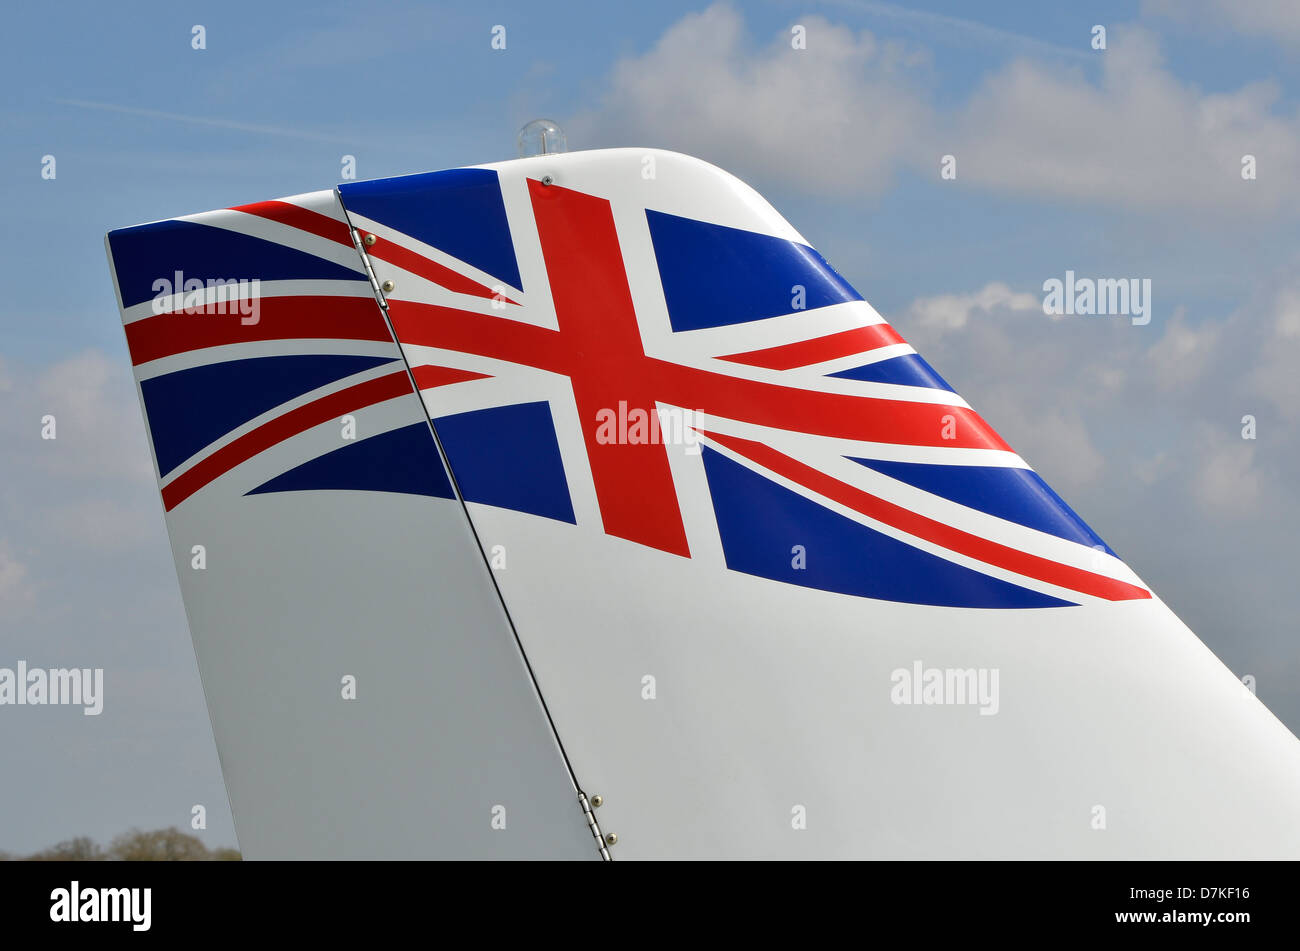 Union jack or Union flag of great Britain on the tail fin of a light aircraft, a Europa Classic British kitplane. Stock Photo